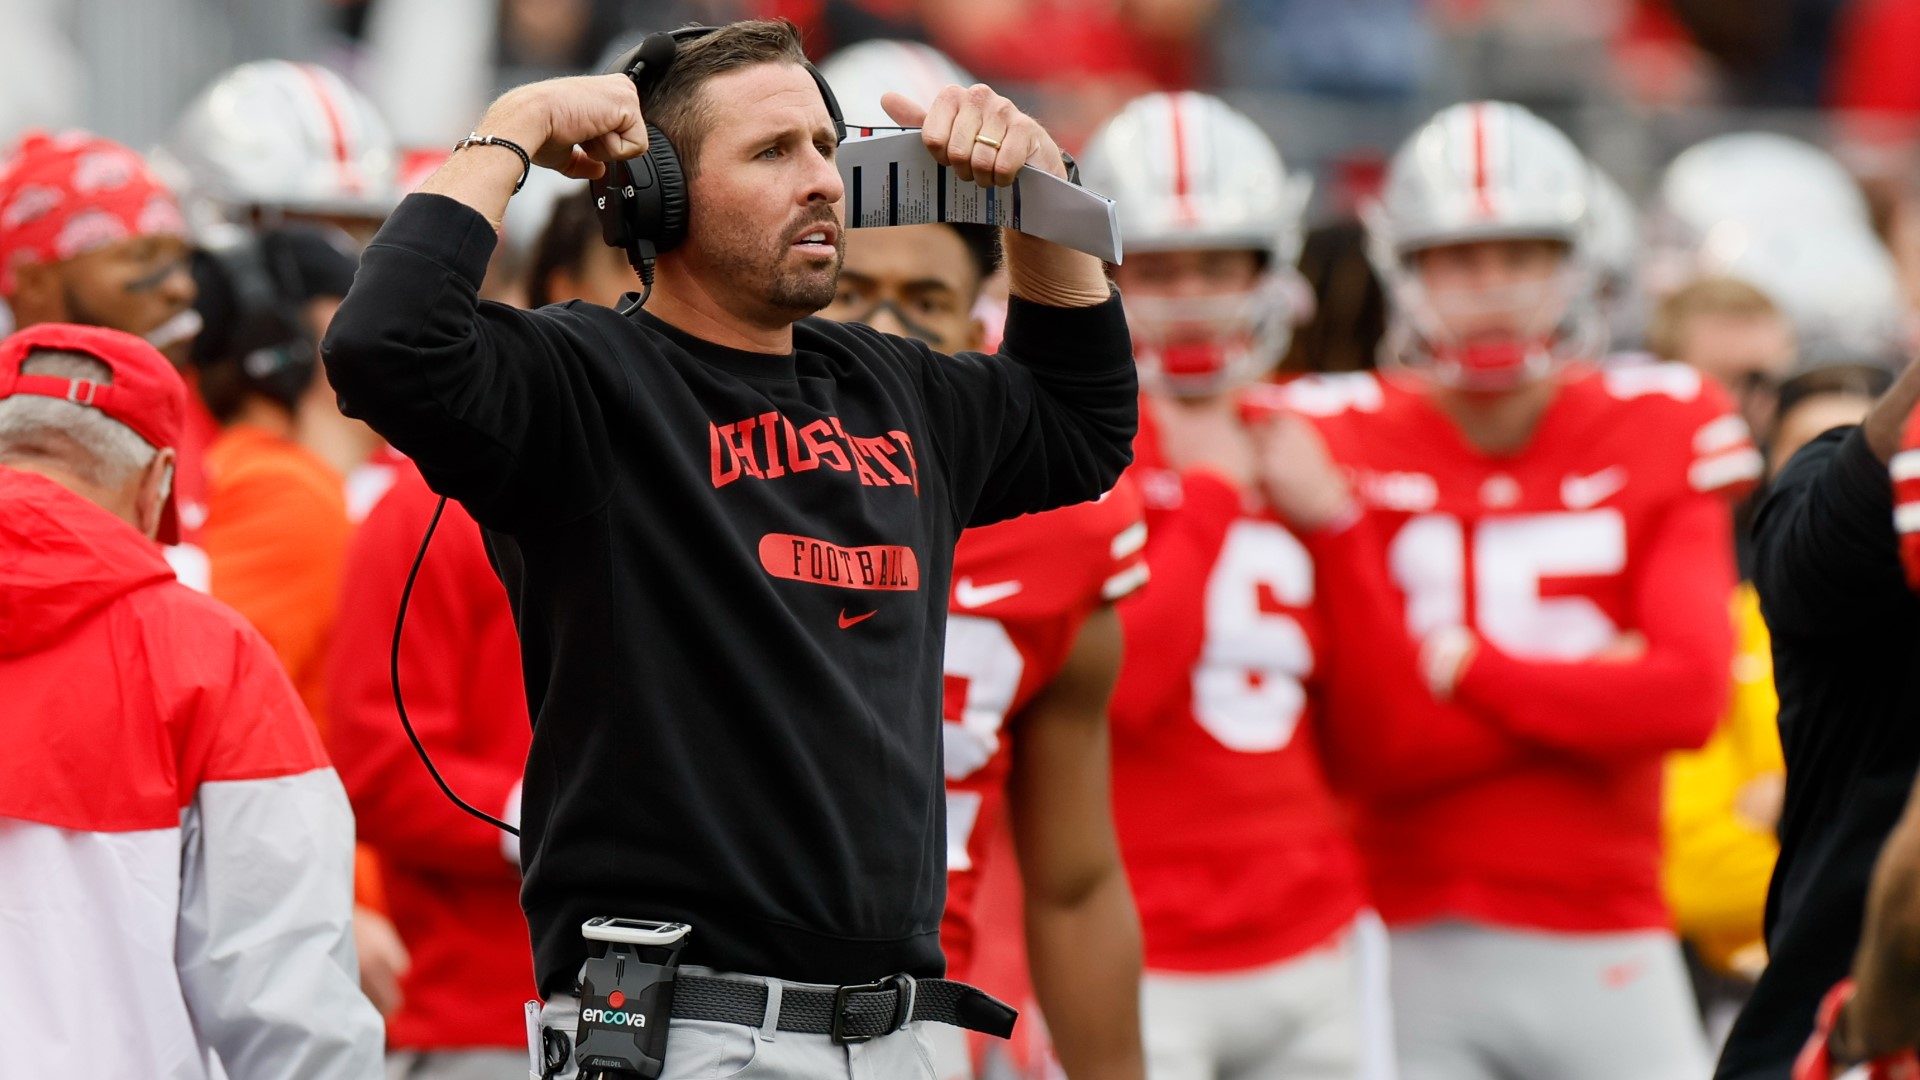 Hartline will replace Kevin Wilson, who left Ohio State to become the new head coach at Tulsa.